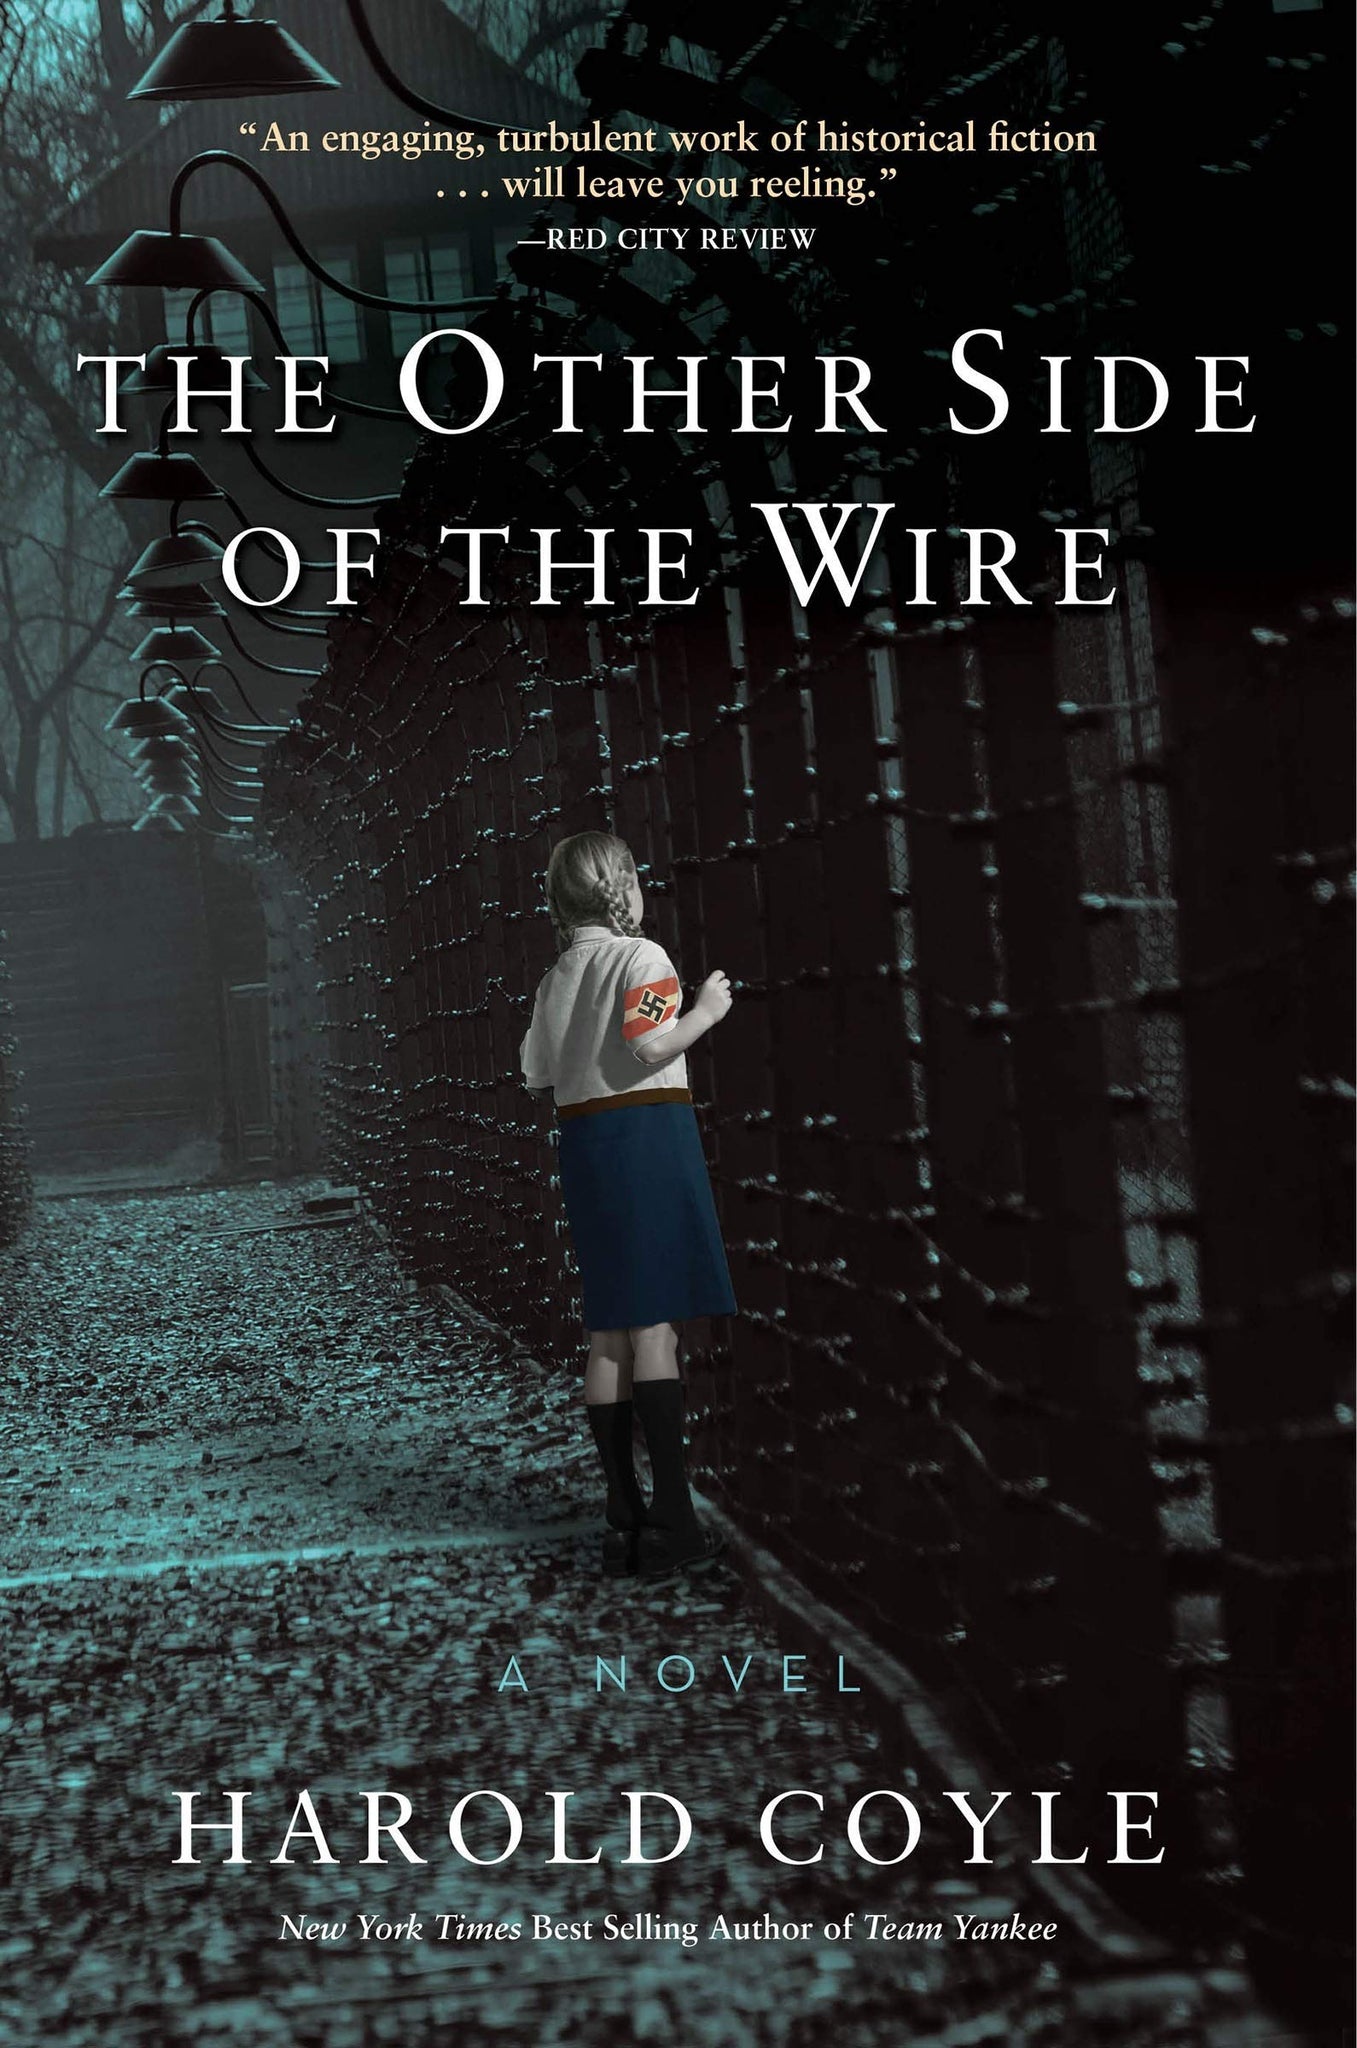 The Other Side of the Wire